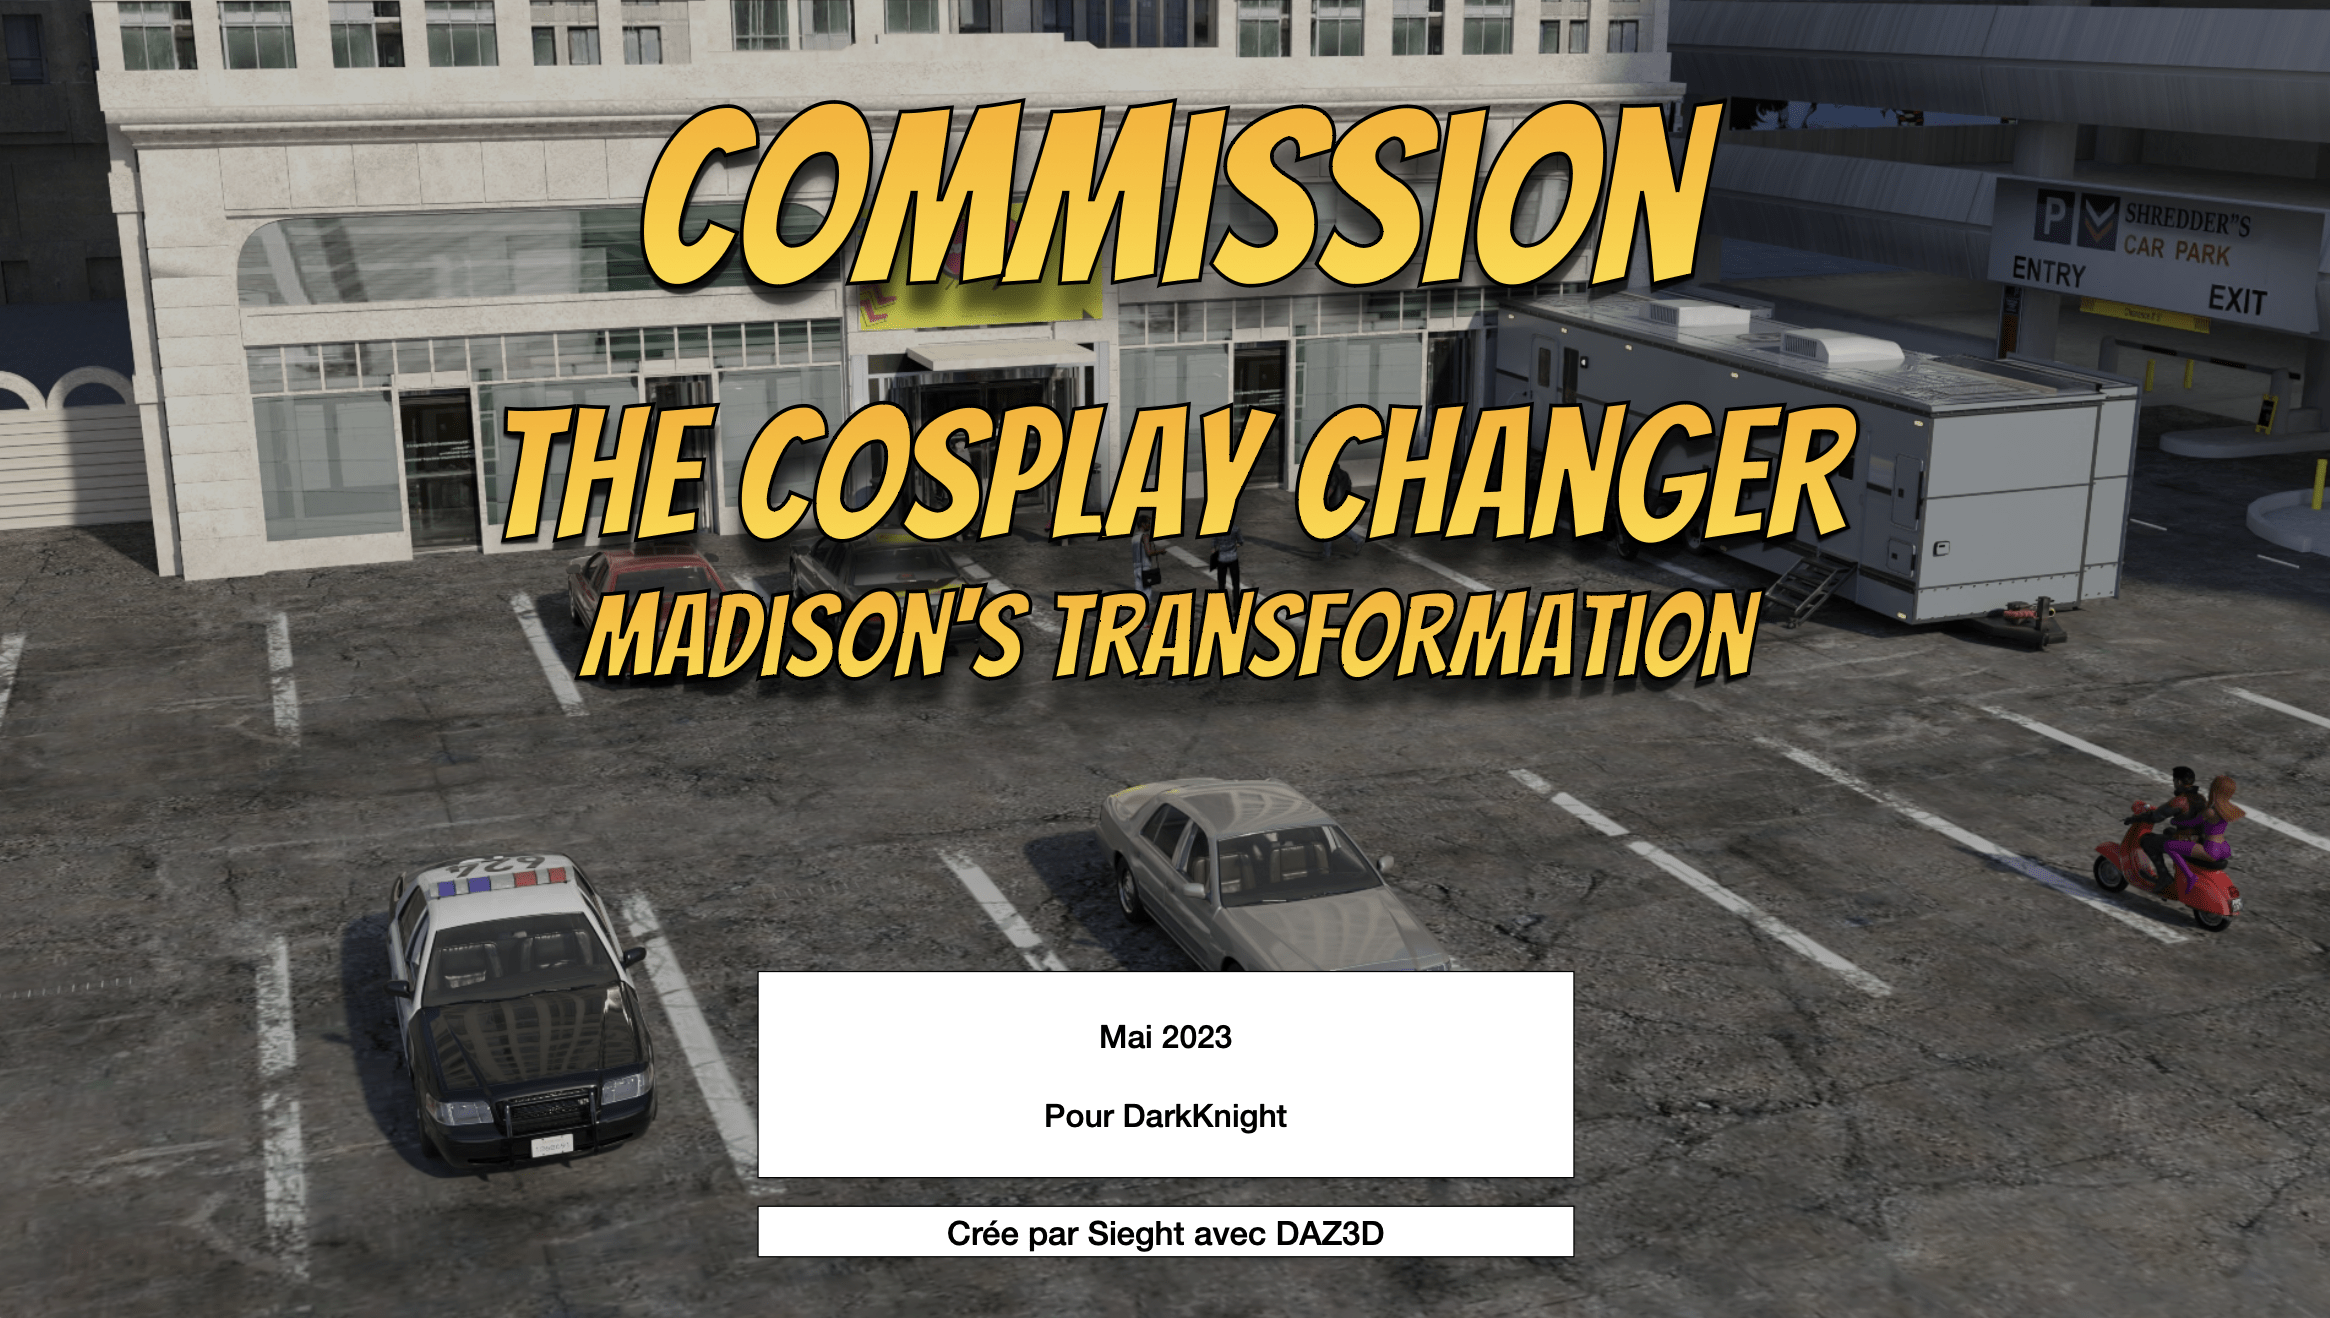 The Cosplay Changer